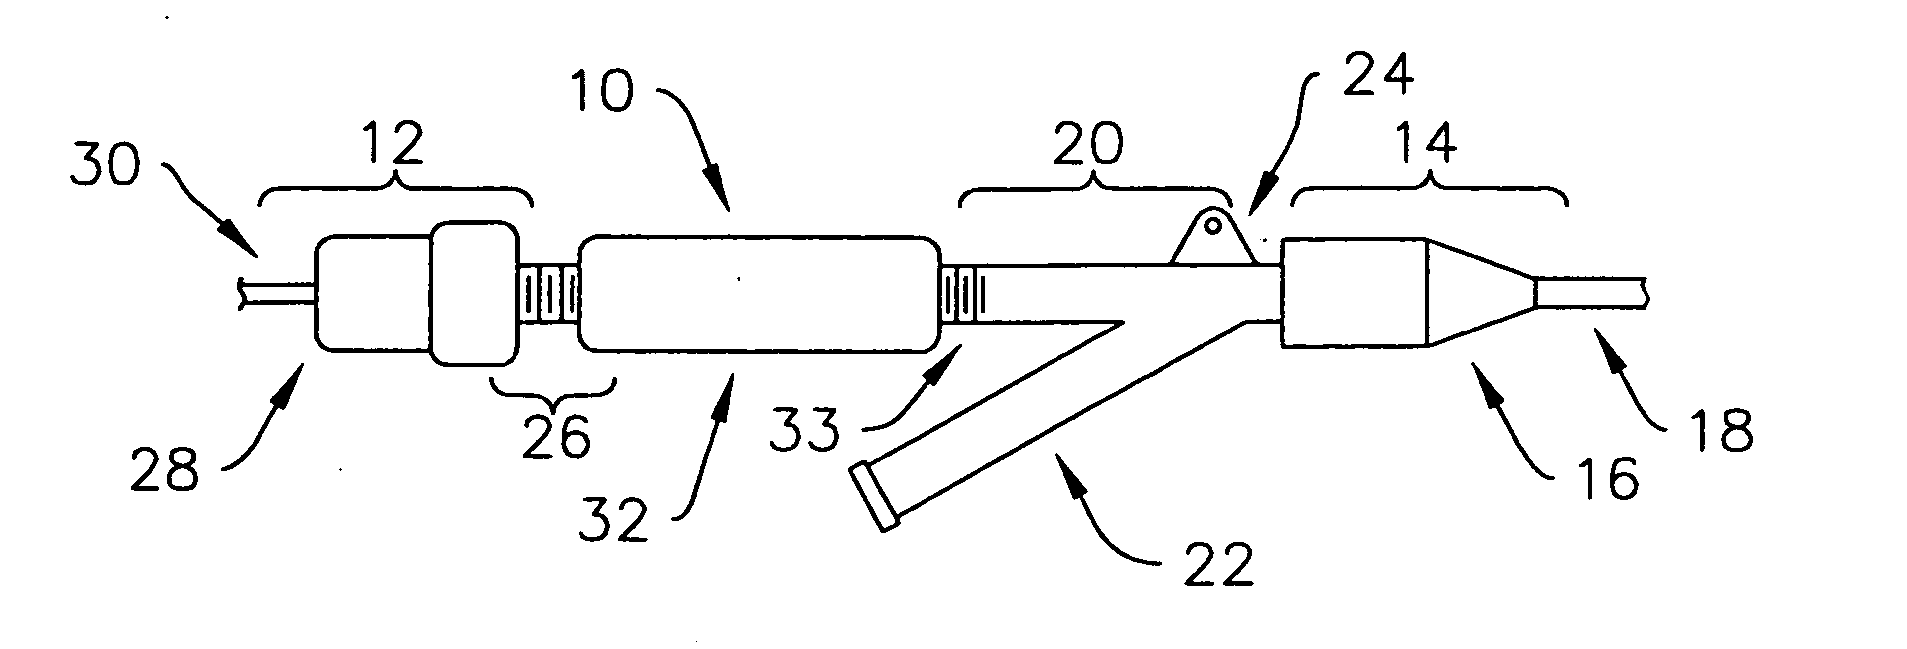 Stent delivery catheter positioning device